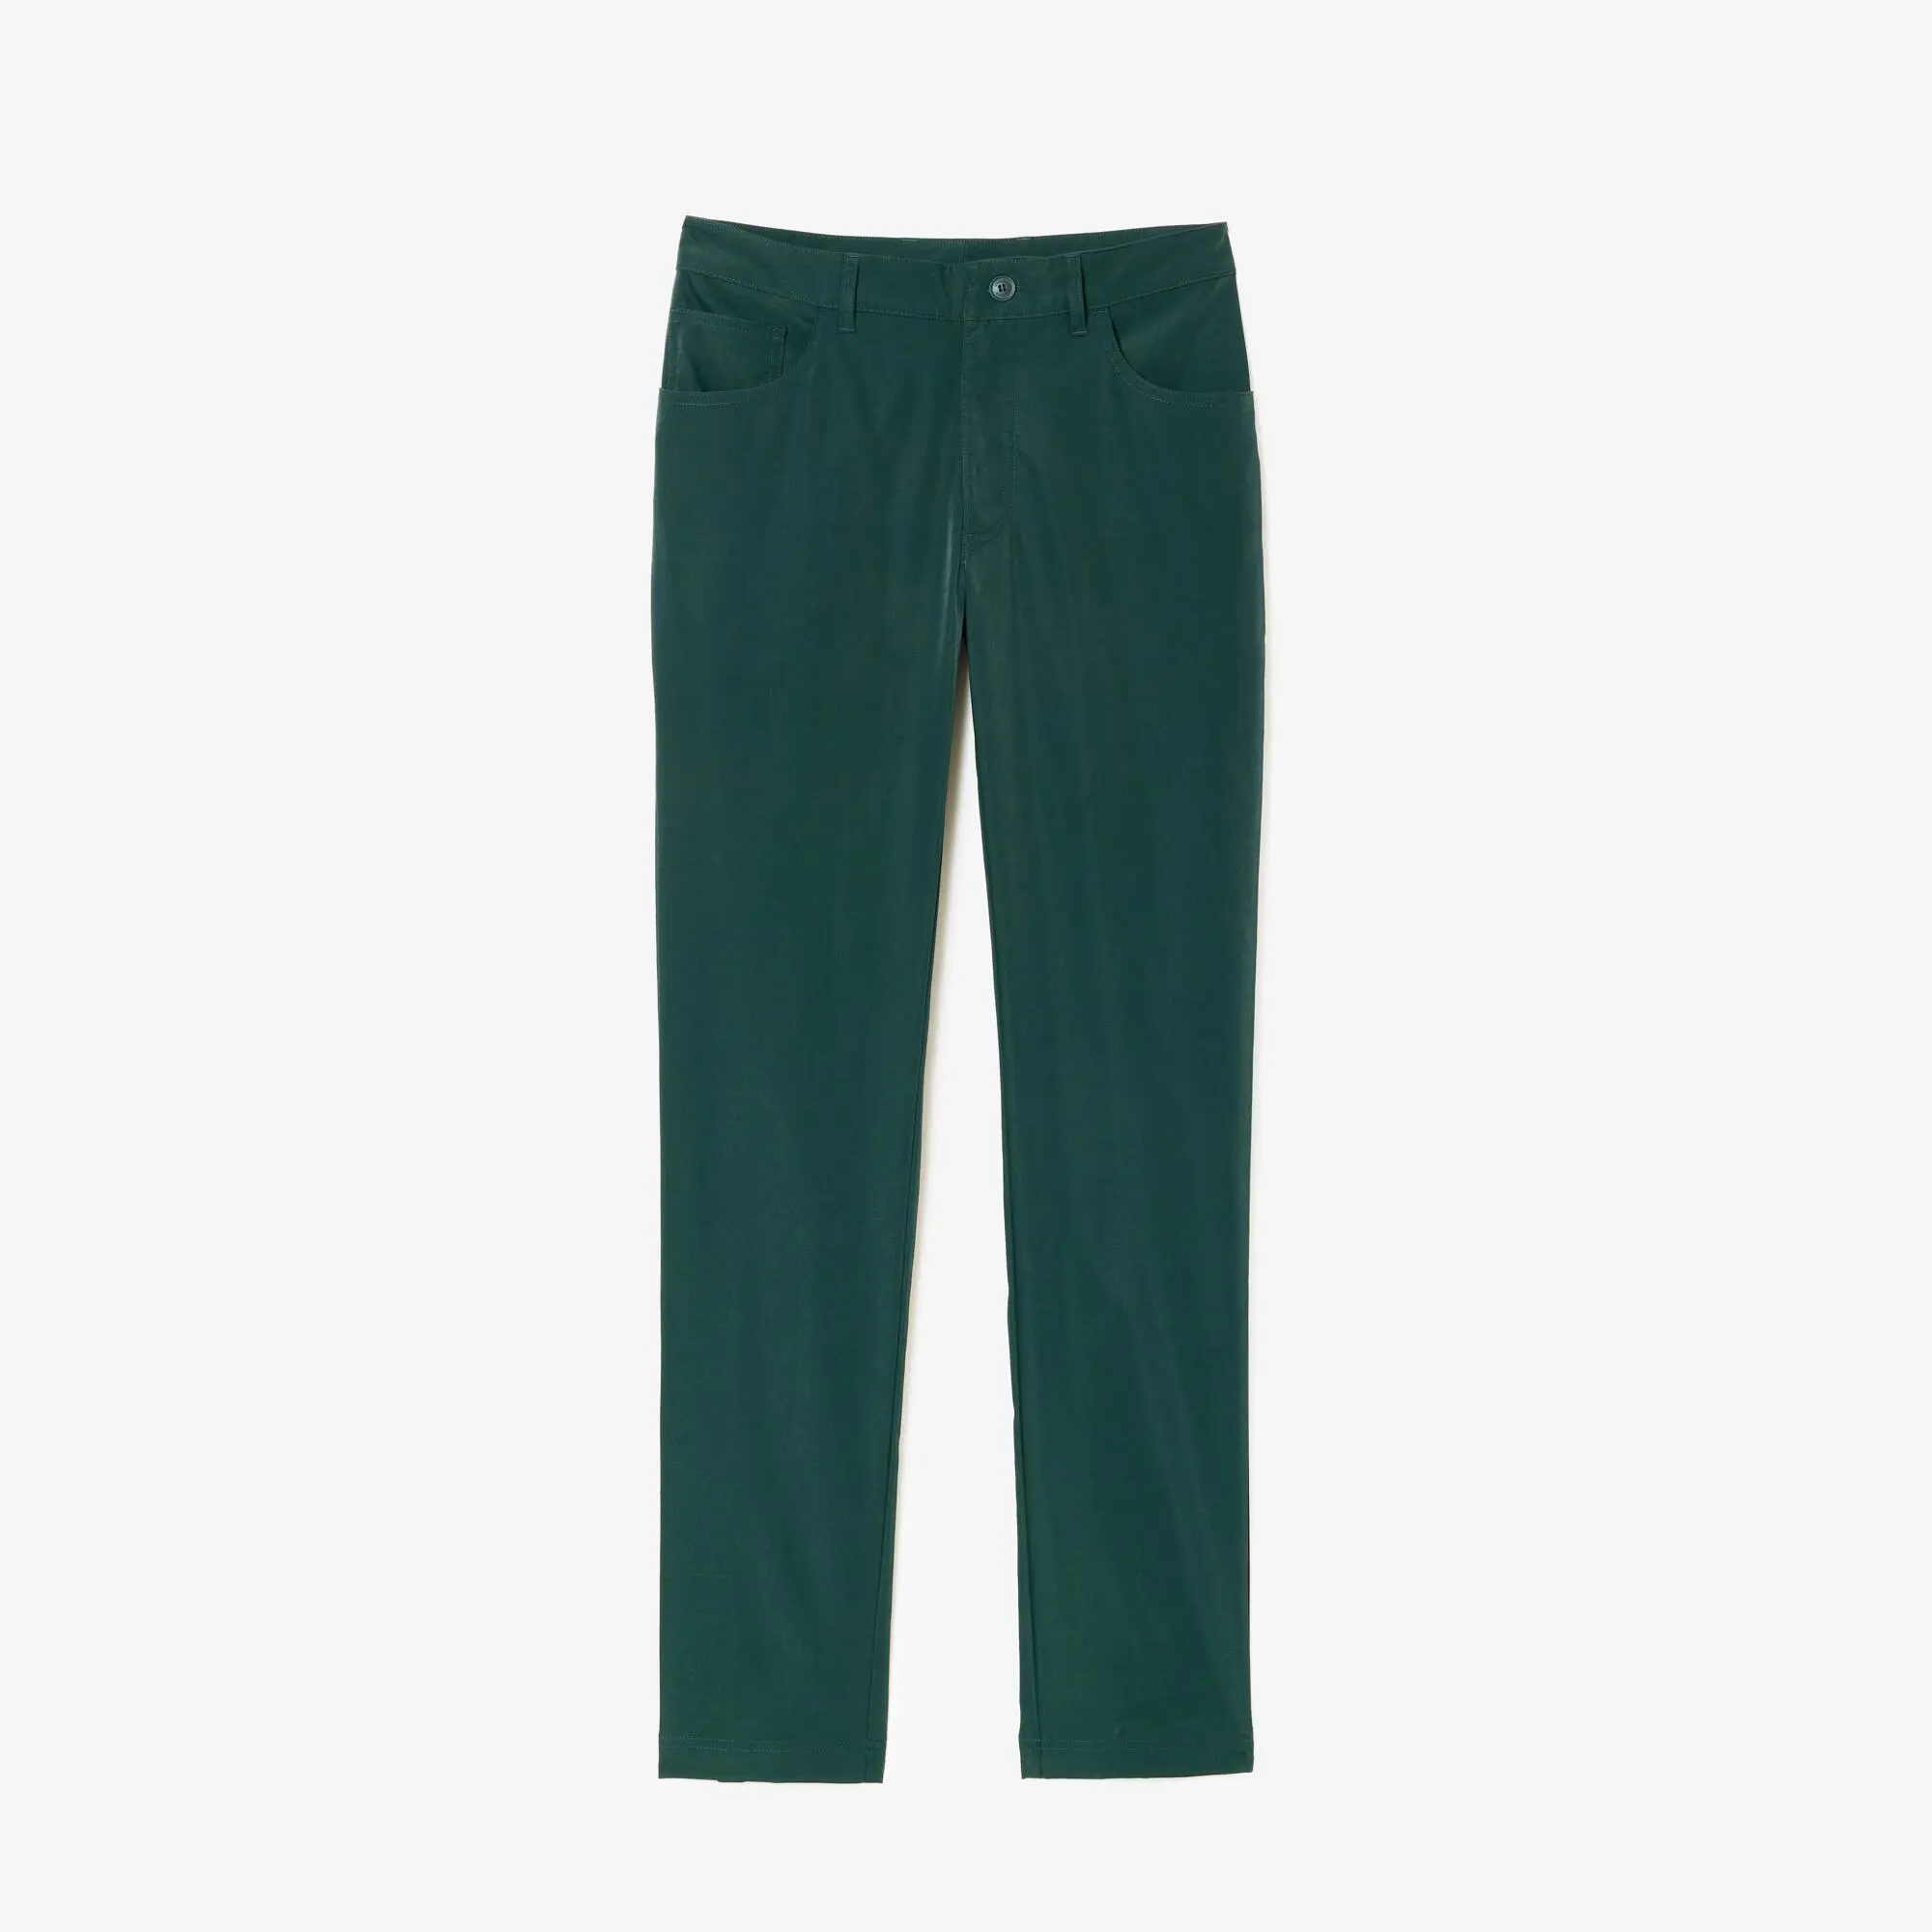 Lacoste Golf trousers with grip band. 2